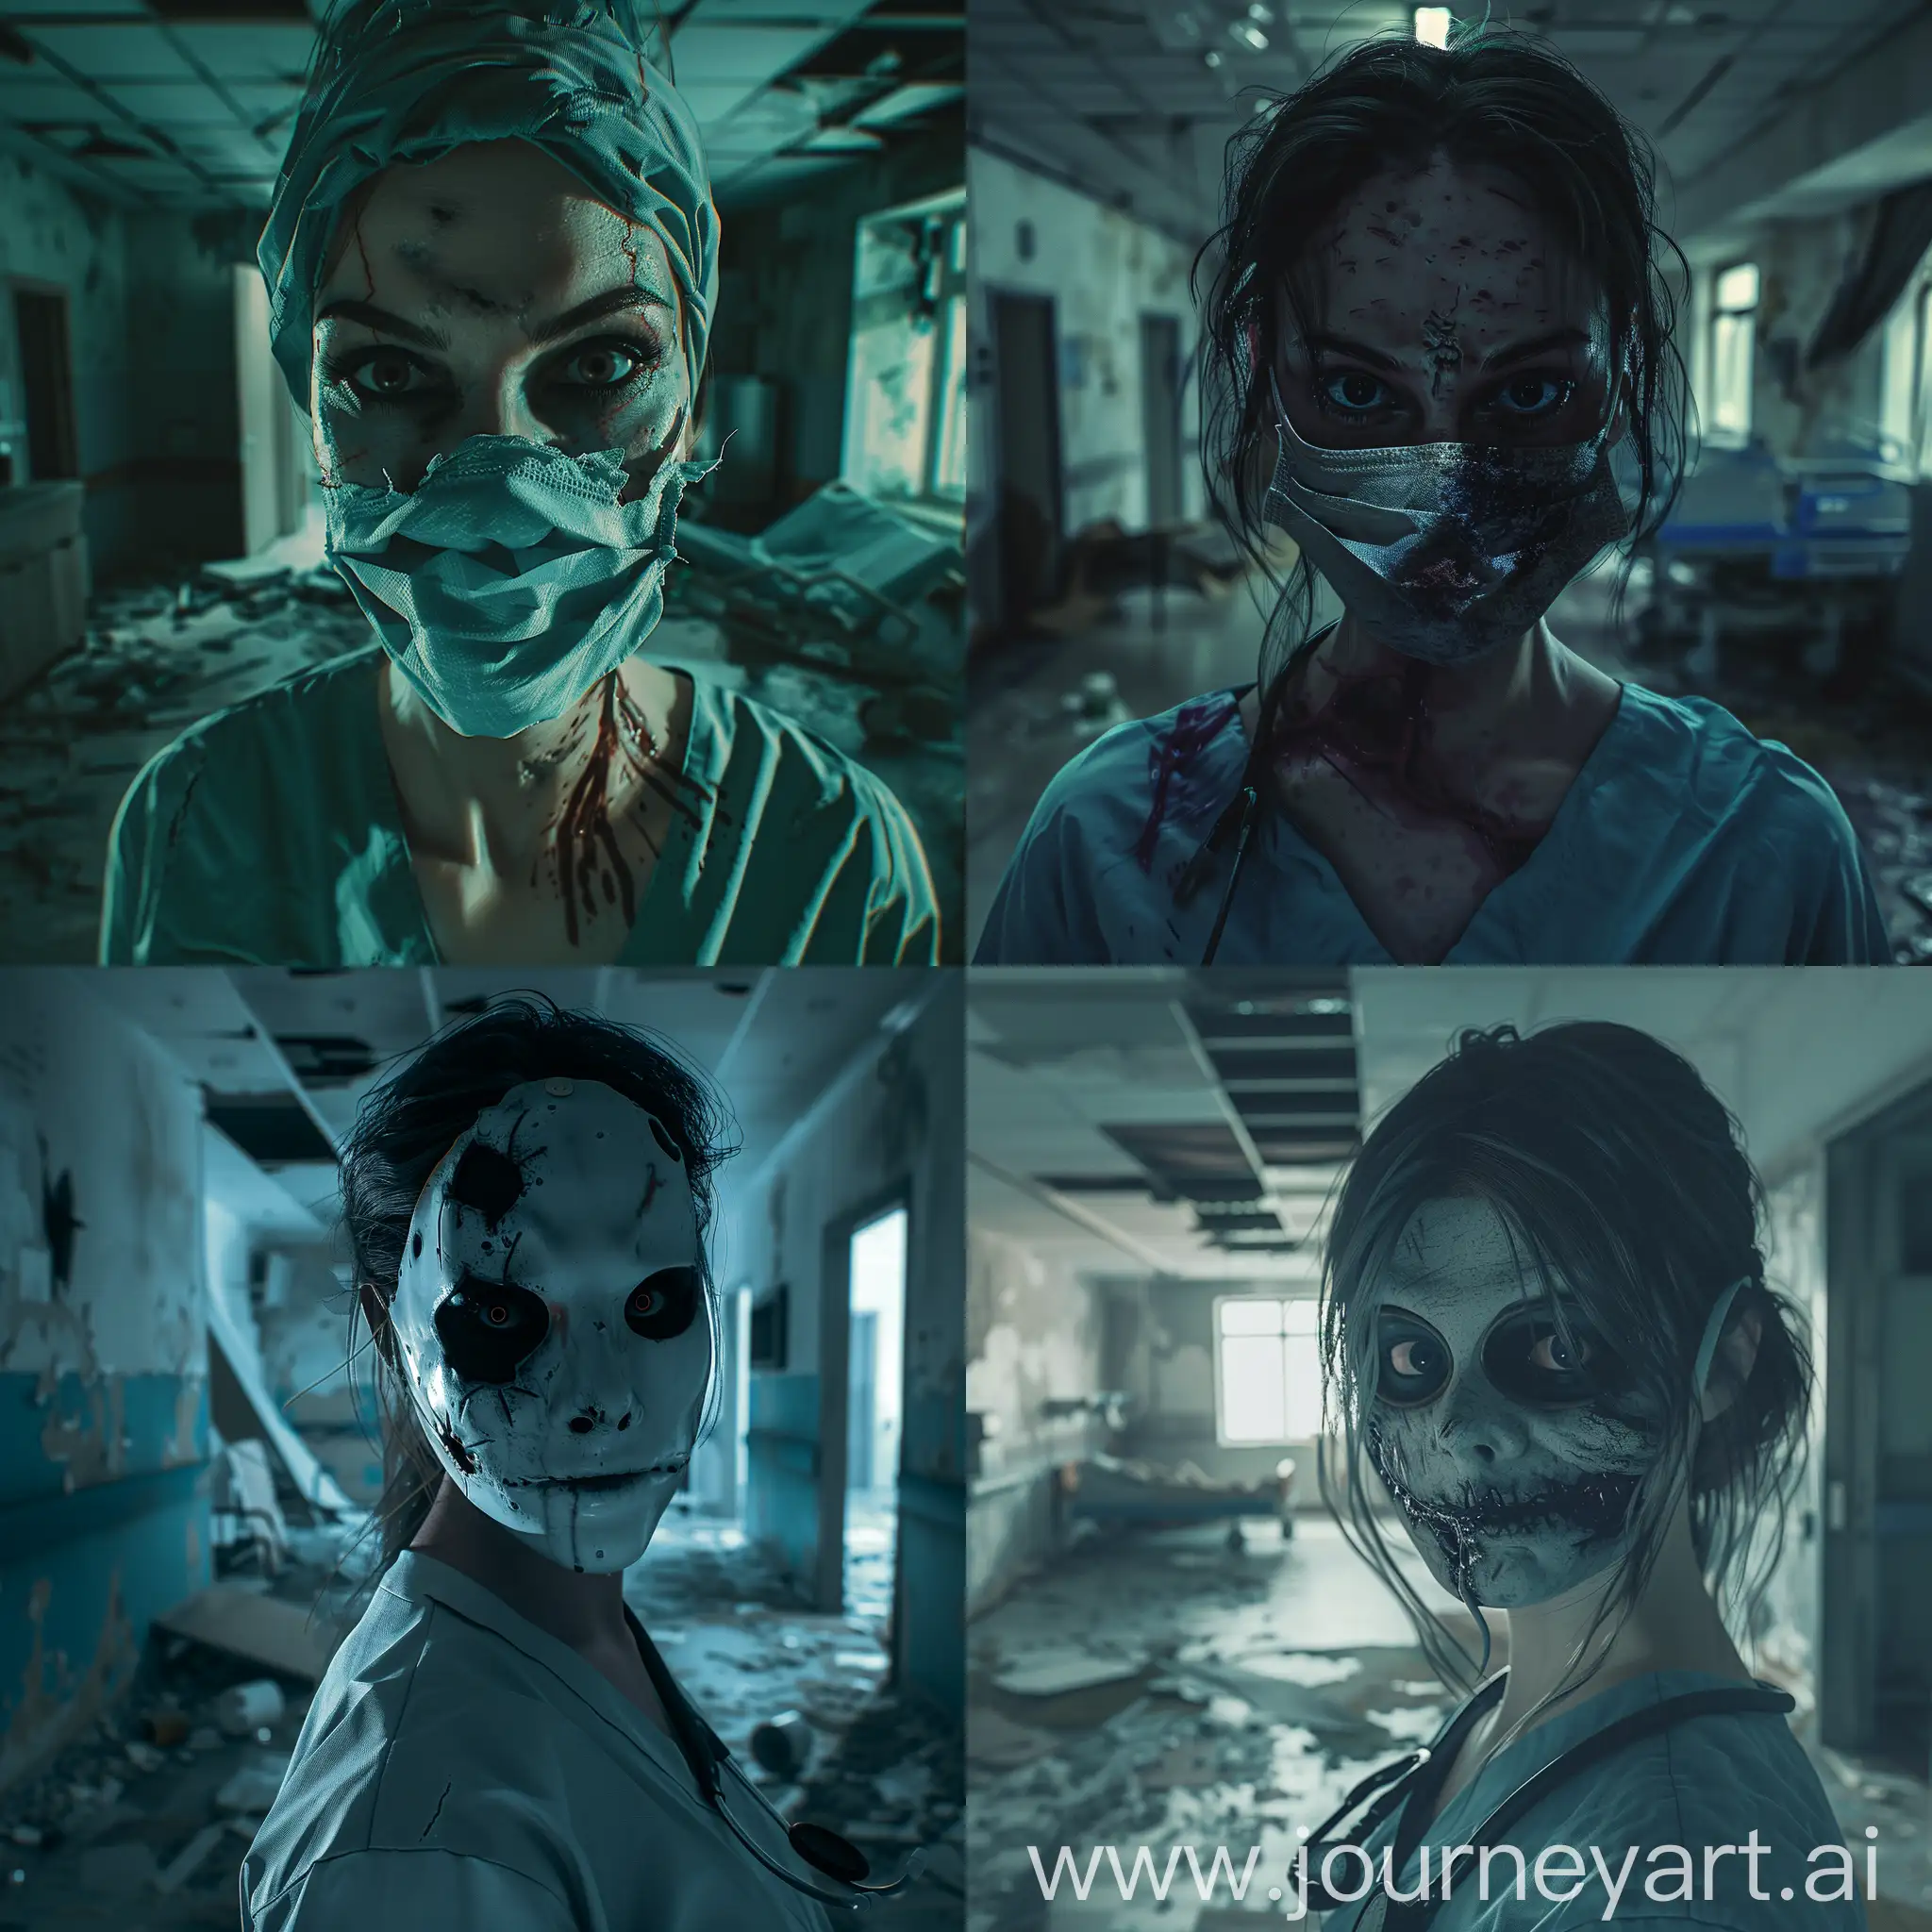 Psychopath nurse with creepy mask, has a vaccine, evil eyes, ruined hospital room, vhs, darkness, psychopath, cinematic lighting, realistic image